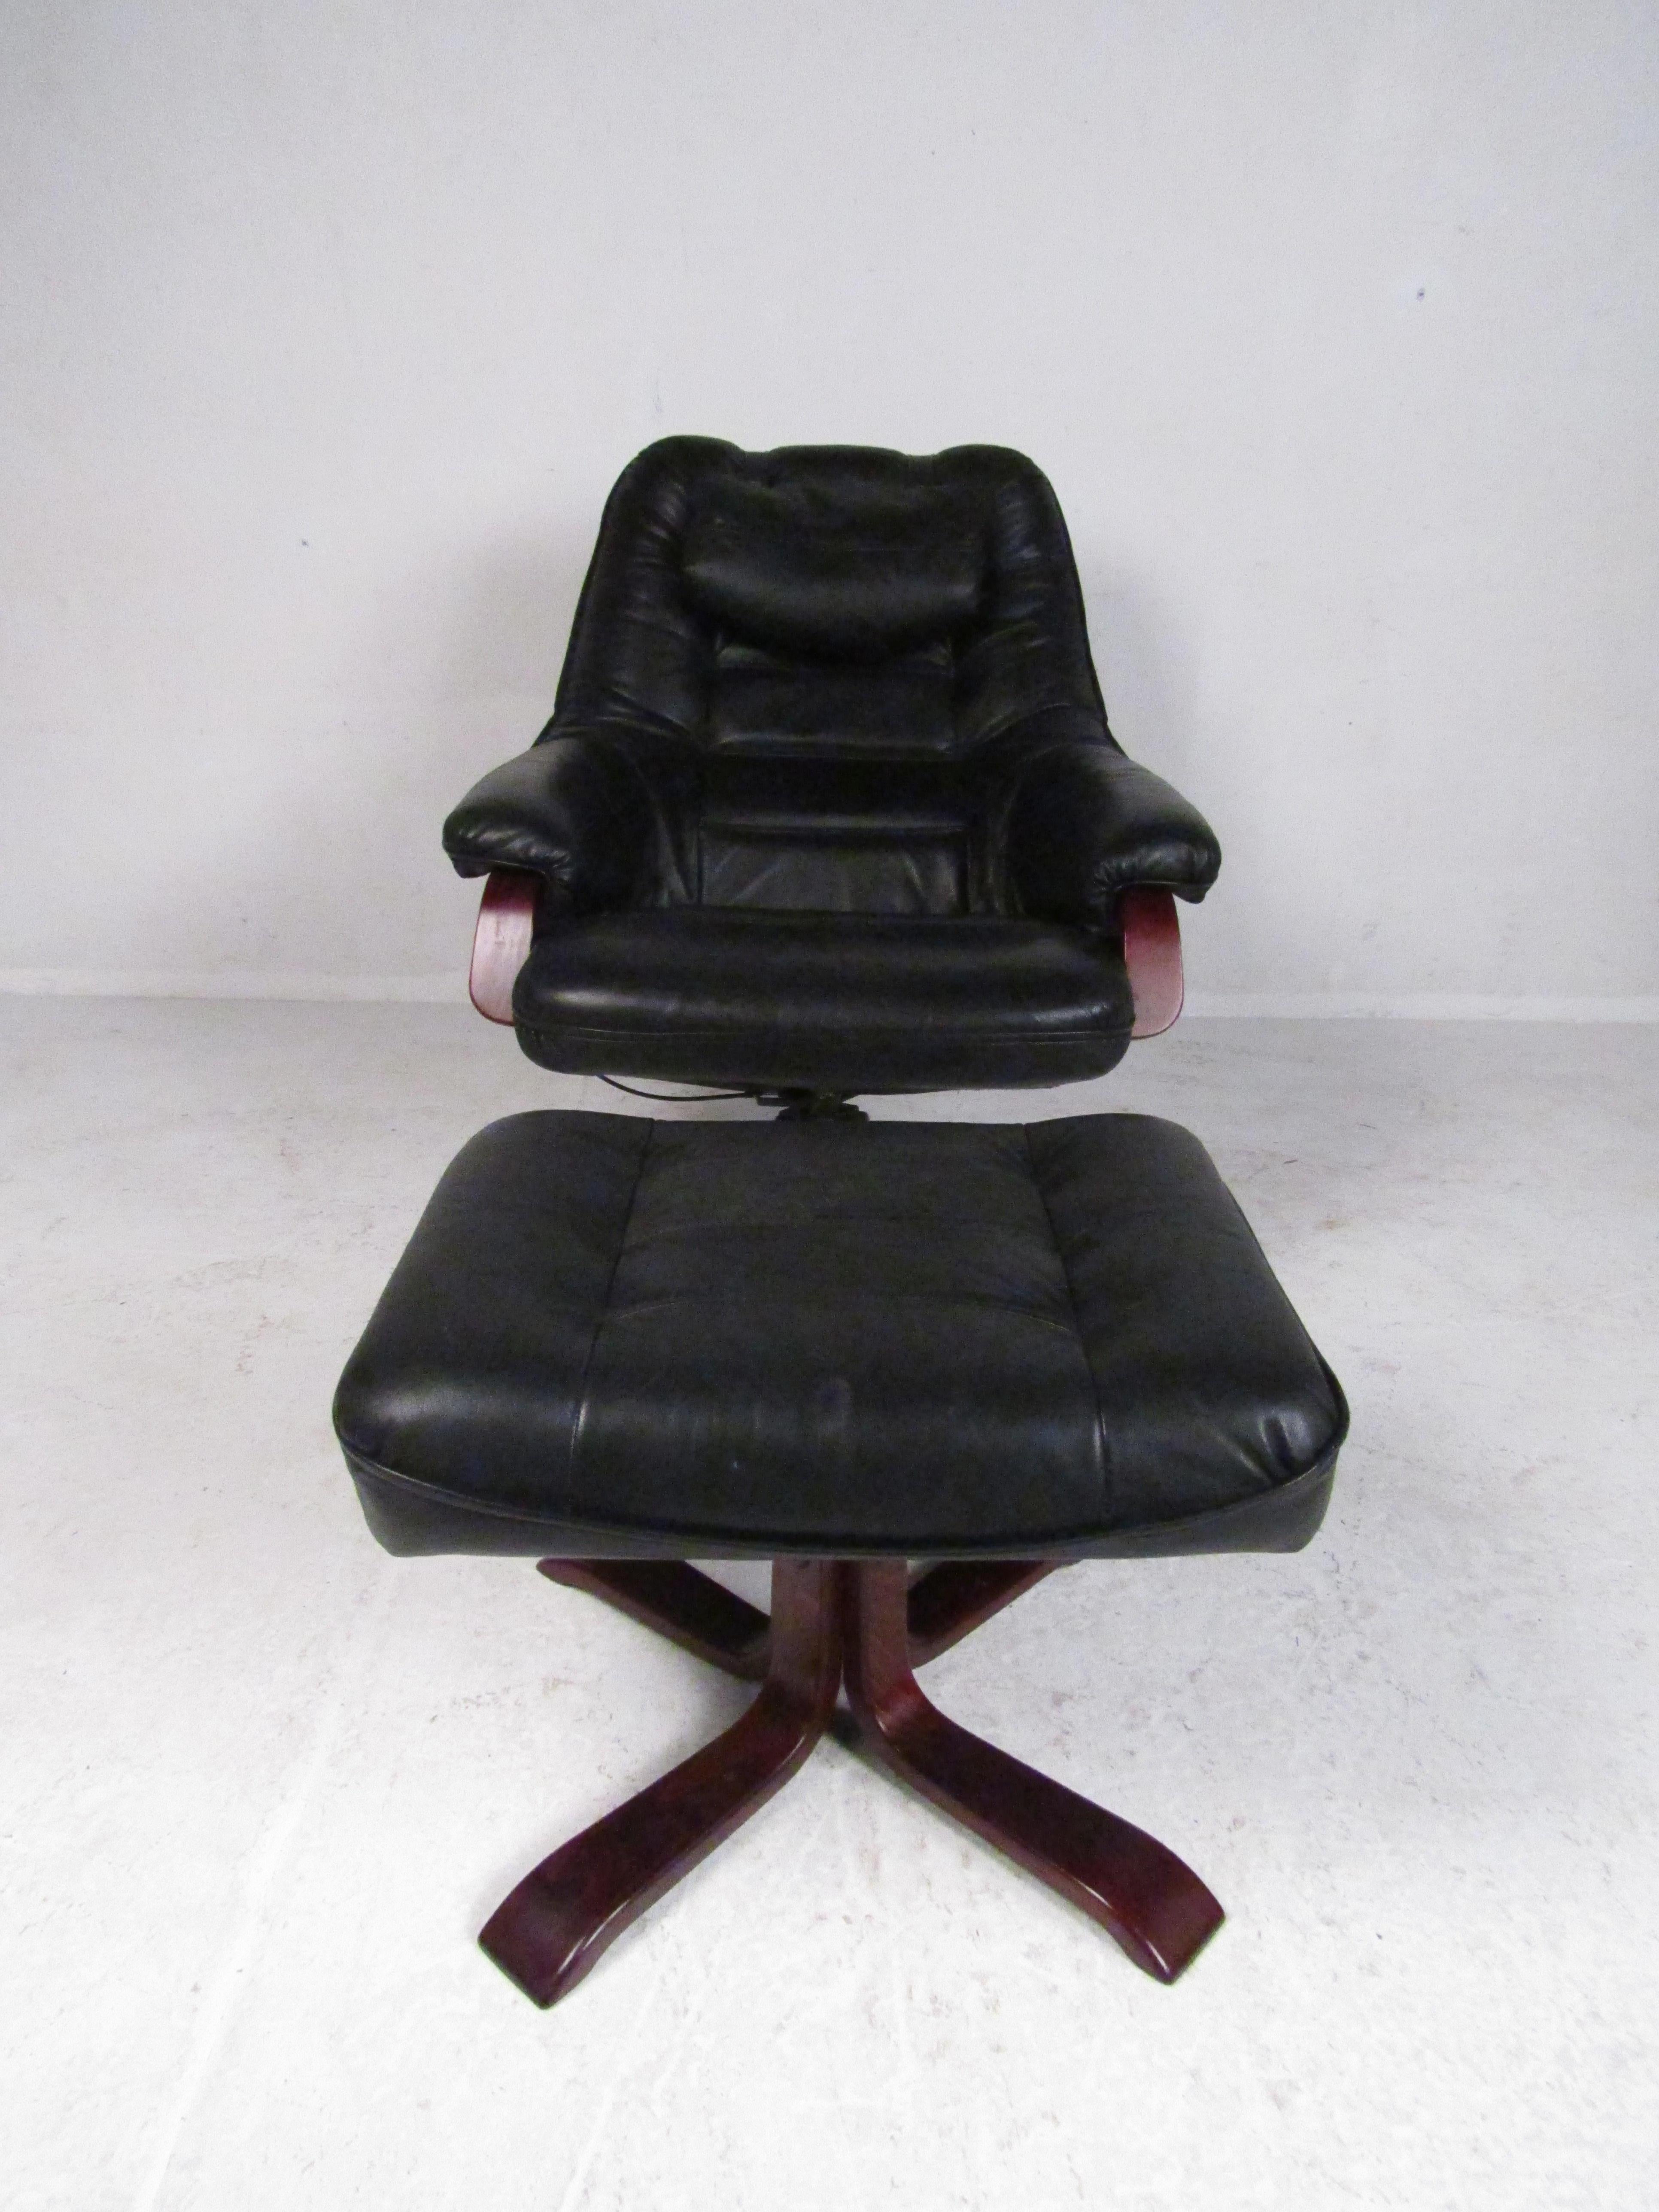 Stylish Swedish modern swiveling lounge chair and ottoman. Sleek design with leather upholstery and rosewood frames and bases. A quality piece that is sure to please in any modern interior. Please confirm item location with dealer (NJ or NY).